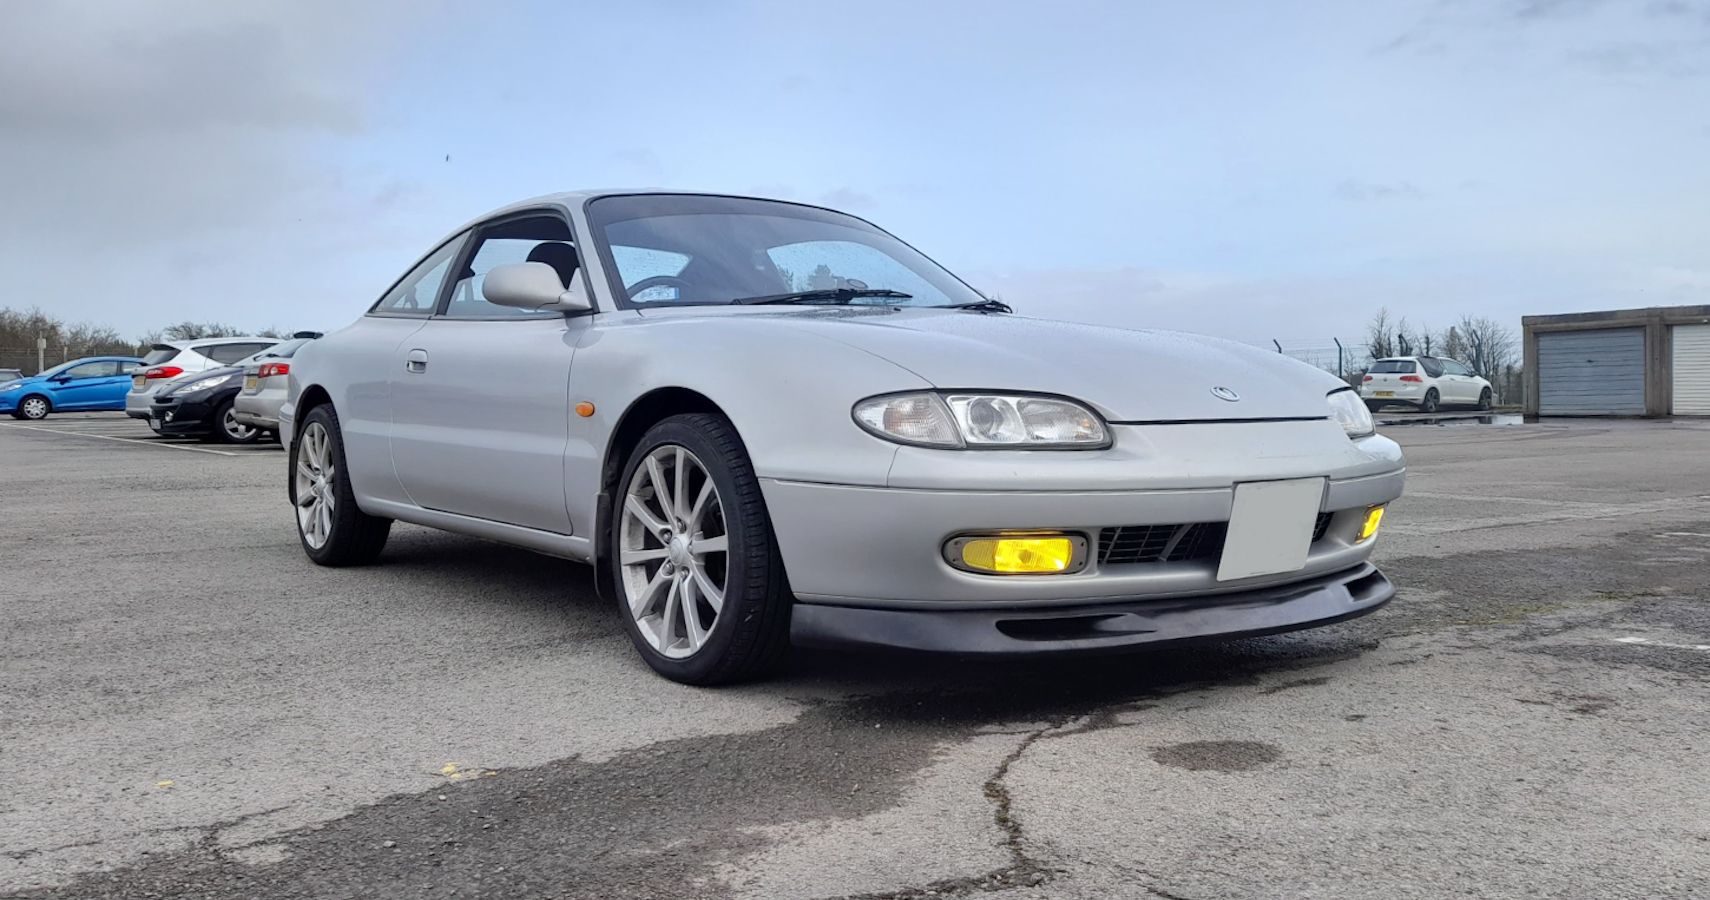 The Mazda MX-6: Today's Most Slept On JDM You've Never Heard Of